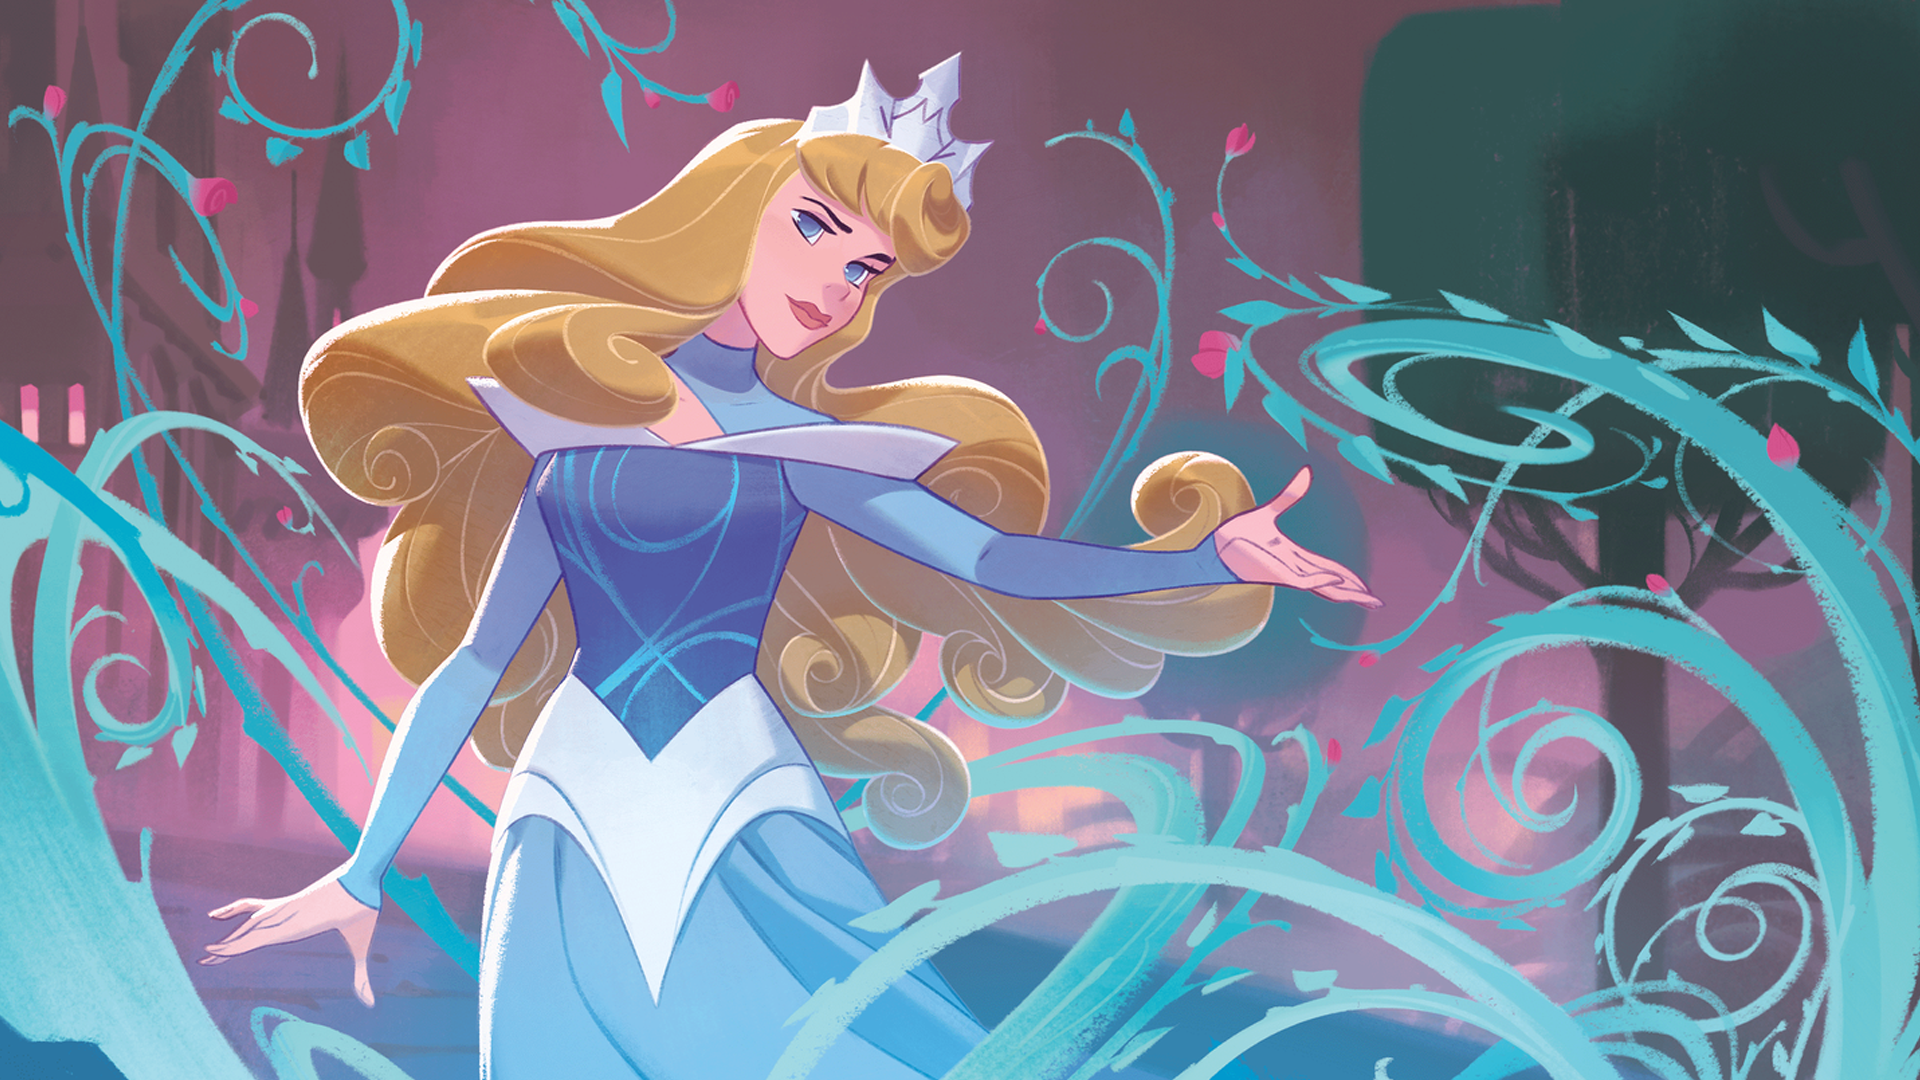 Disney Lorcana – Sleeping Beauty card unveiled for upcoming trading card game